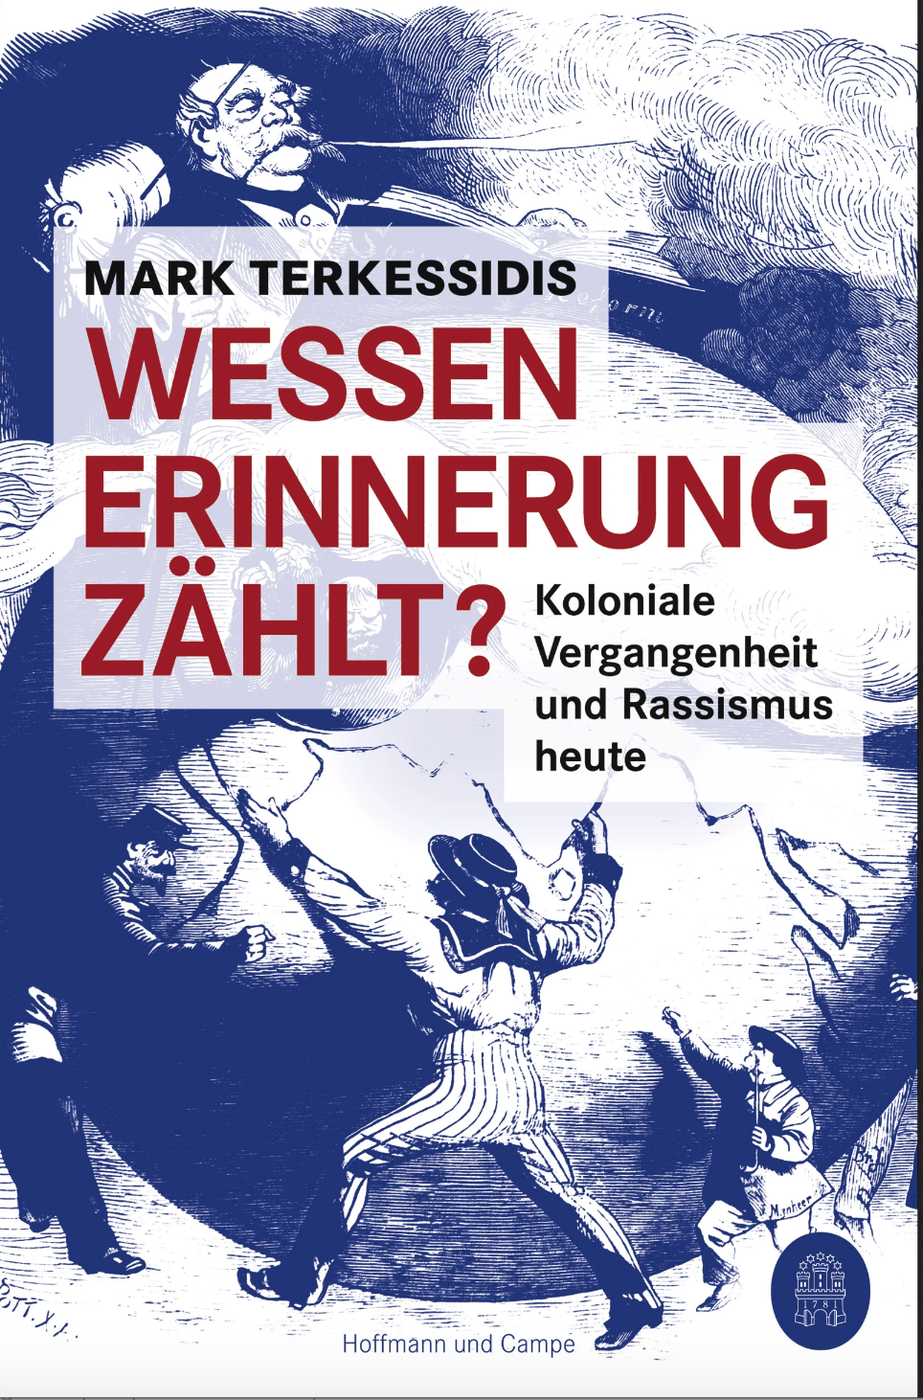 Lecture by Mark Terkessidis as part of
 
  Figurations of Gender, Difference and Identity - Ideological Grips, Authoritarian Turns, Popularization of Violence.
 
 A series of events at the Institute for Education in the Art IKL (in German) conceptualized and organized by Elke Gaugele and Elke Krasny.